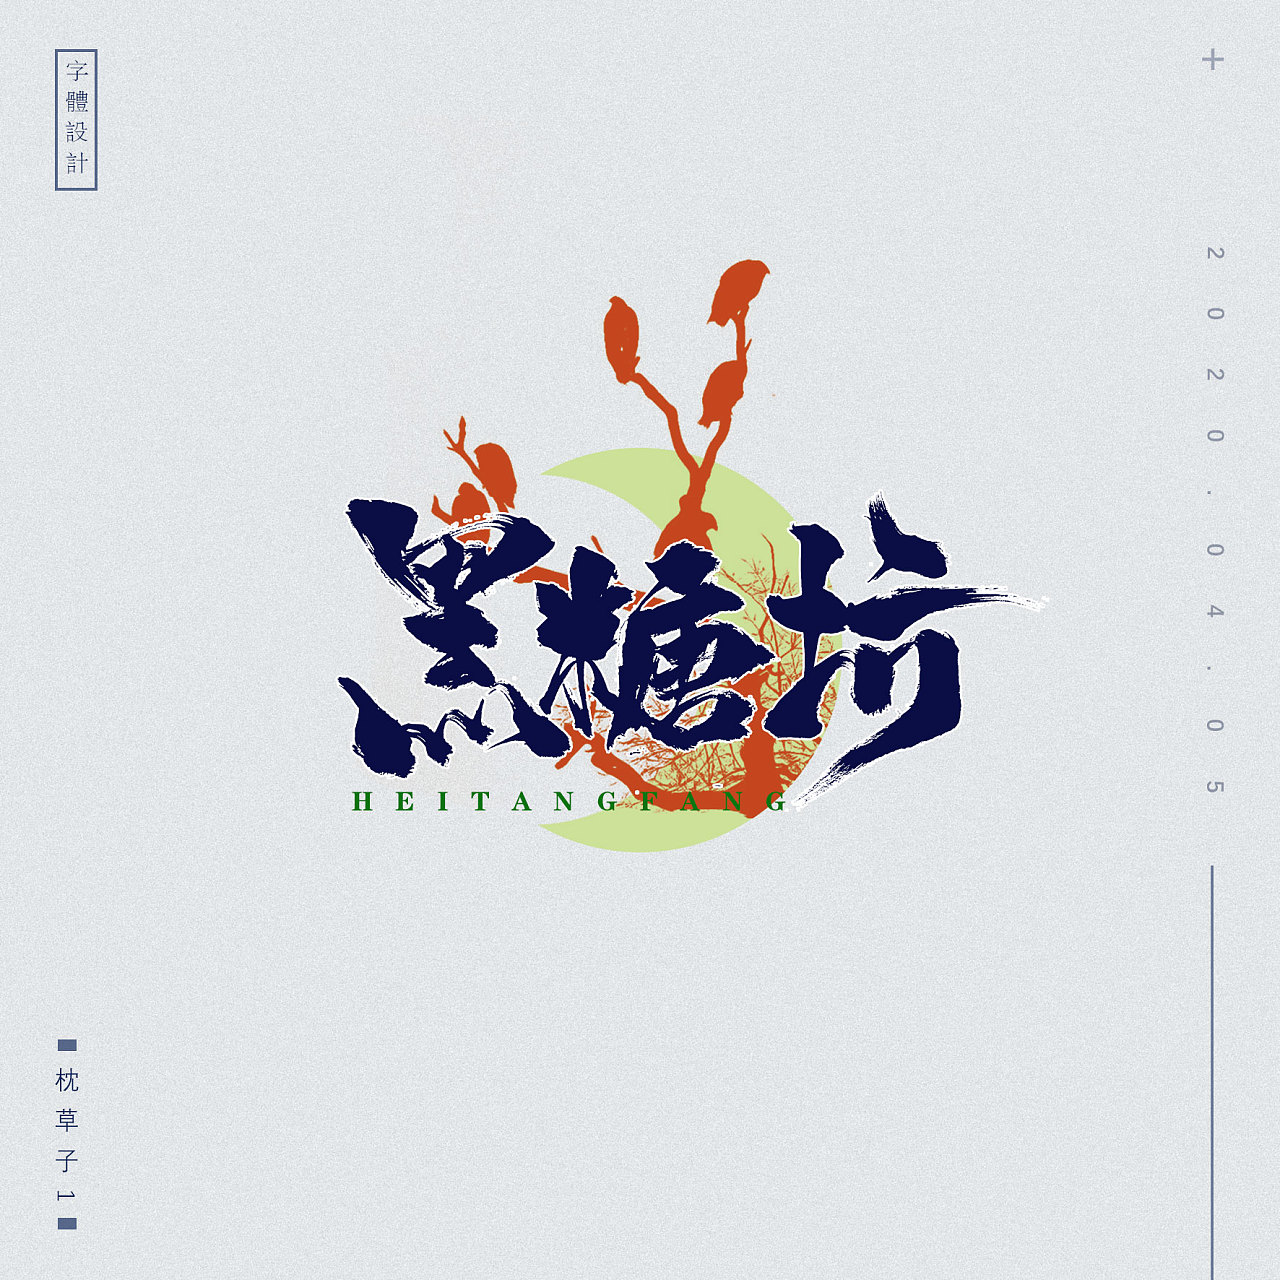 Chinese Creative Font Design- Make insinuating remarks